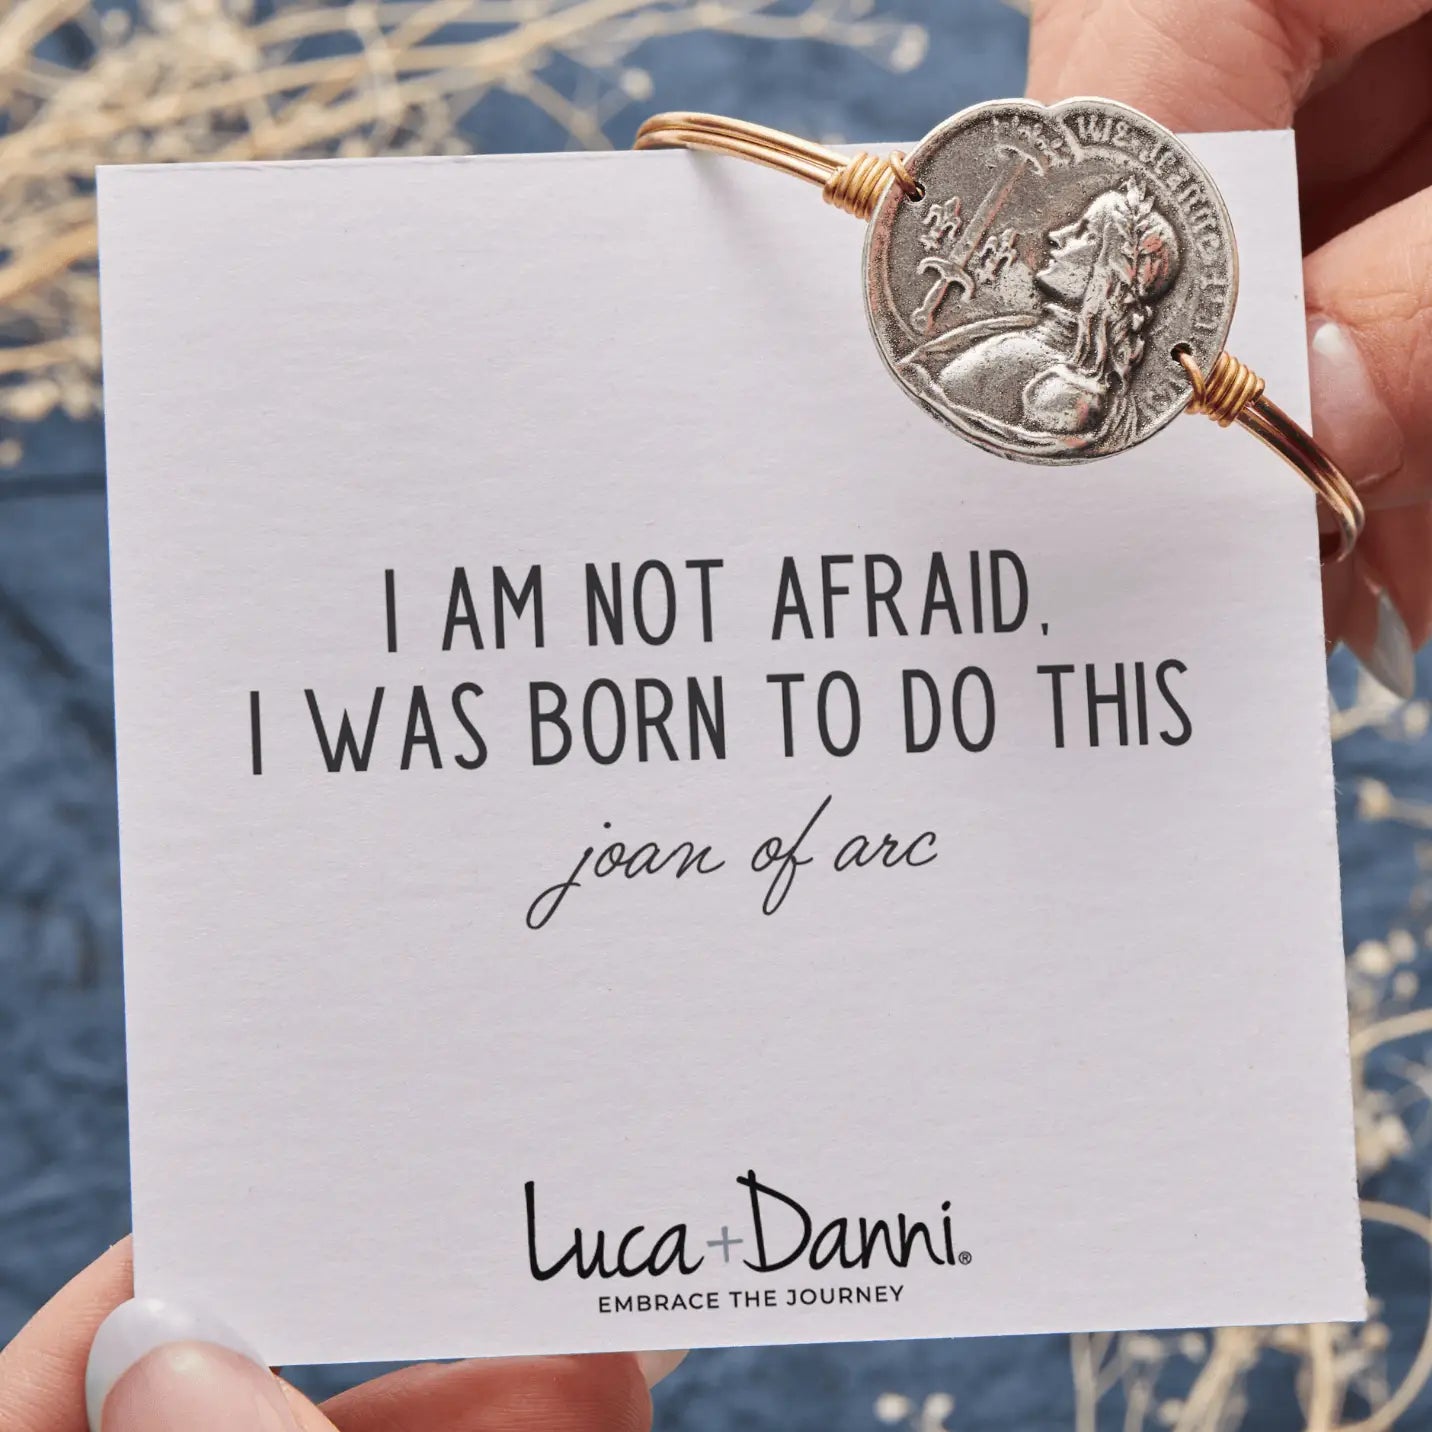 Luca + Danni Joan of Arc graphic card - "I am not afraid. I was born to do this. -Joan of Arc"